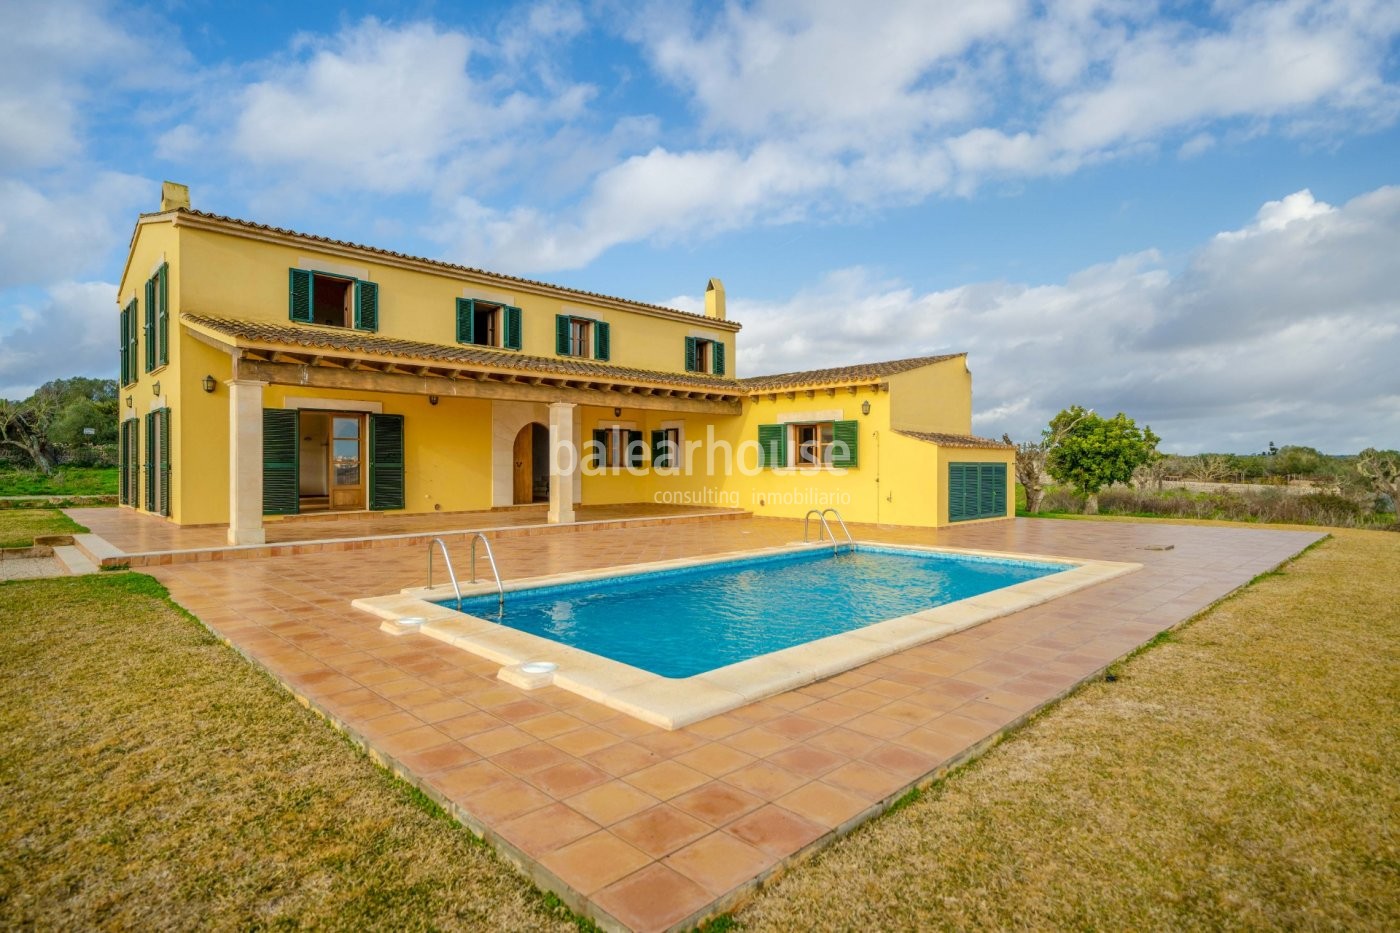 Extensive country estate in Santanyí, pure rural essence very close to spectacular beaches.